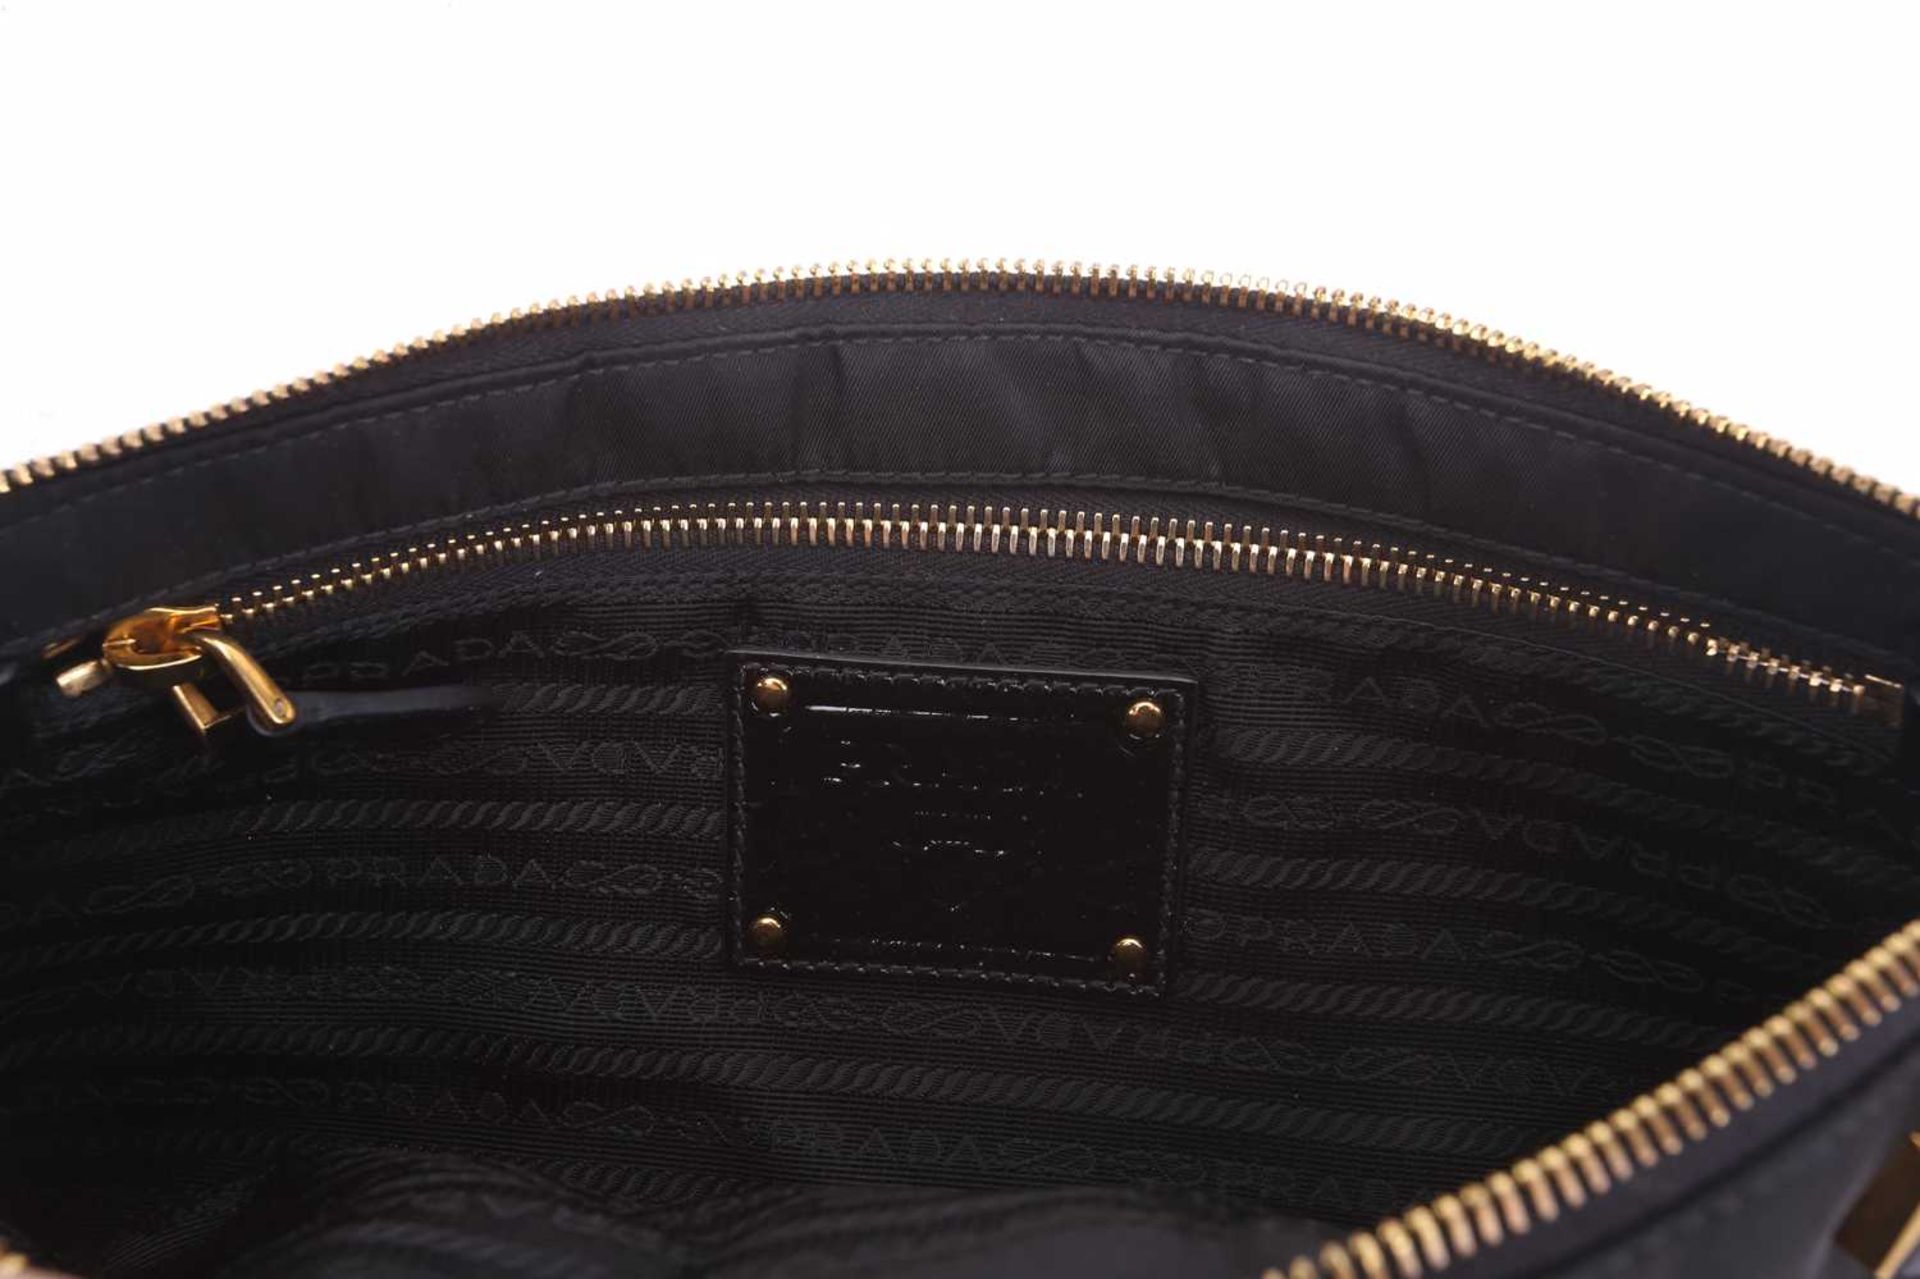 Prada - a bejewelled 'Whips Pietre' clutch in black nylon, from 2009 Resort Collection, with - Image 4 of 5